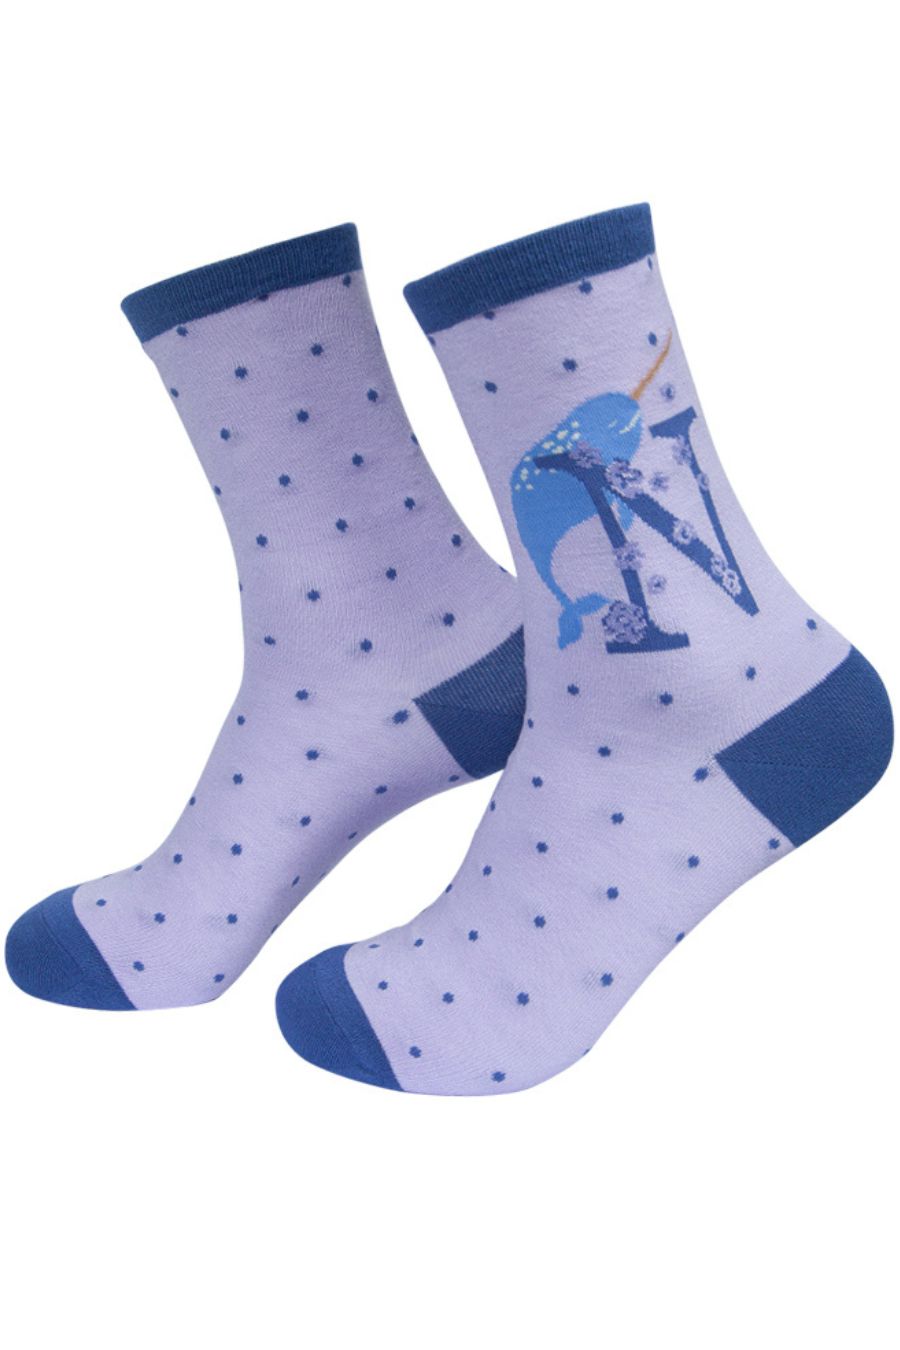 lilac socks with a large letter n, a narwhal and a floral pattern on the ankle